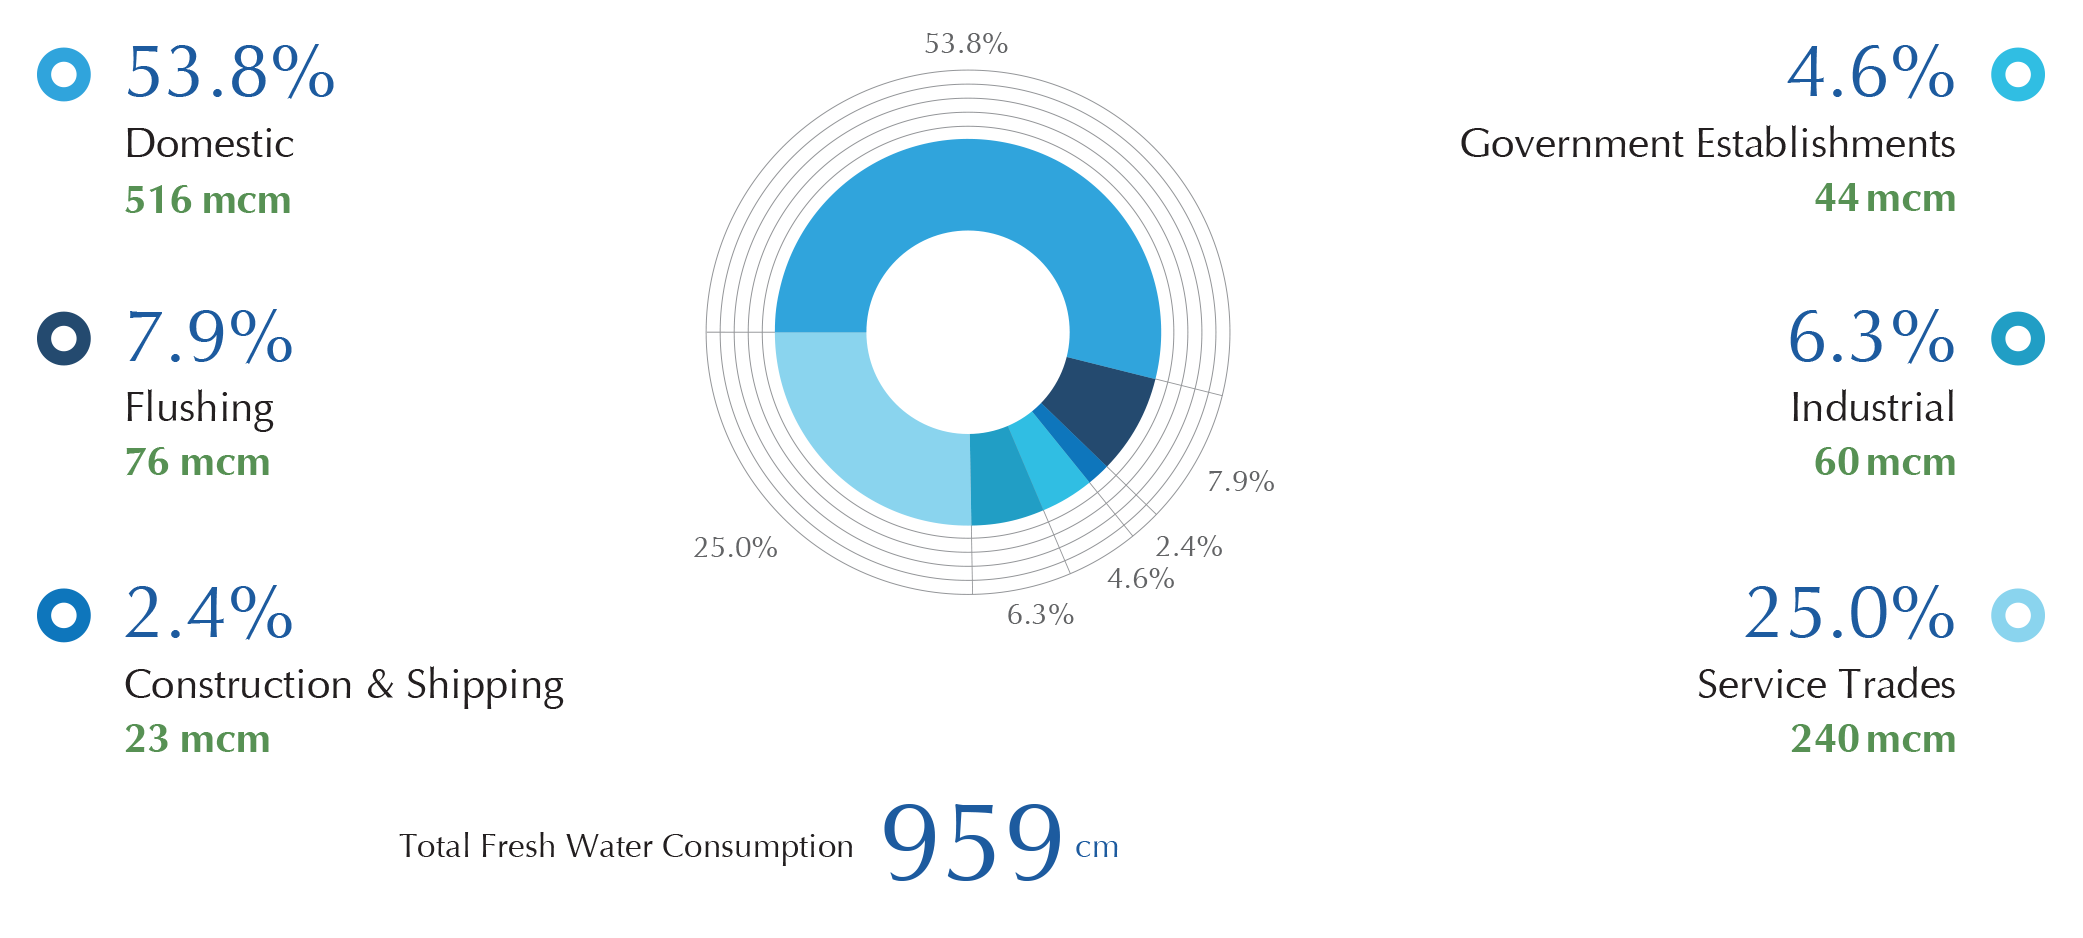 Annual fresh Water Consumption 2014 by Sectors in Million Cubic Metres (MCM) and Percentage of Total Diagram